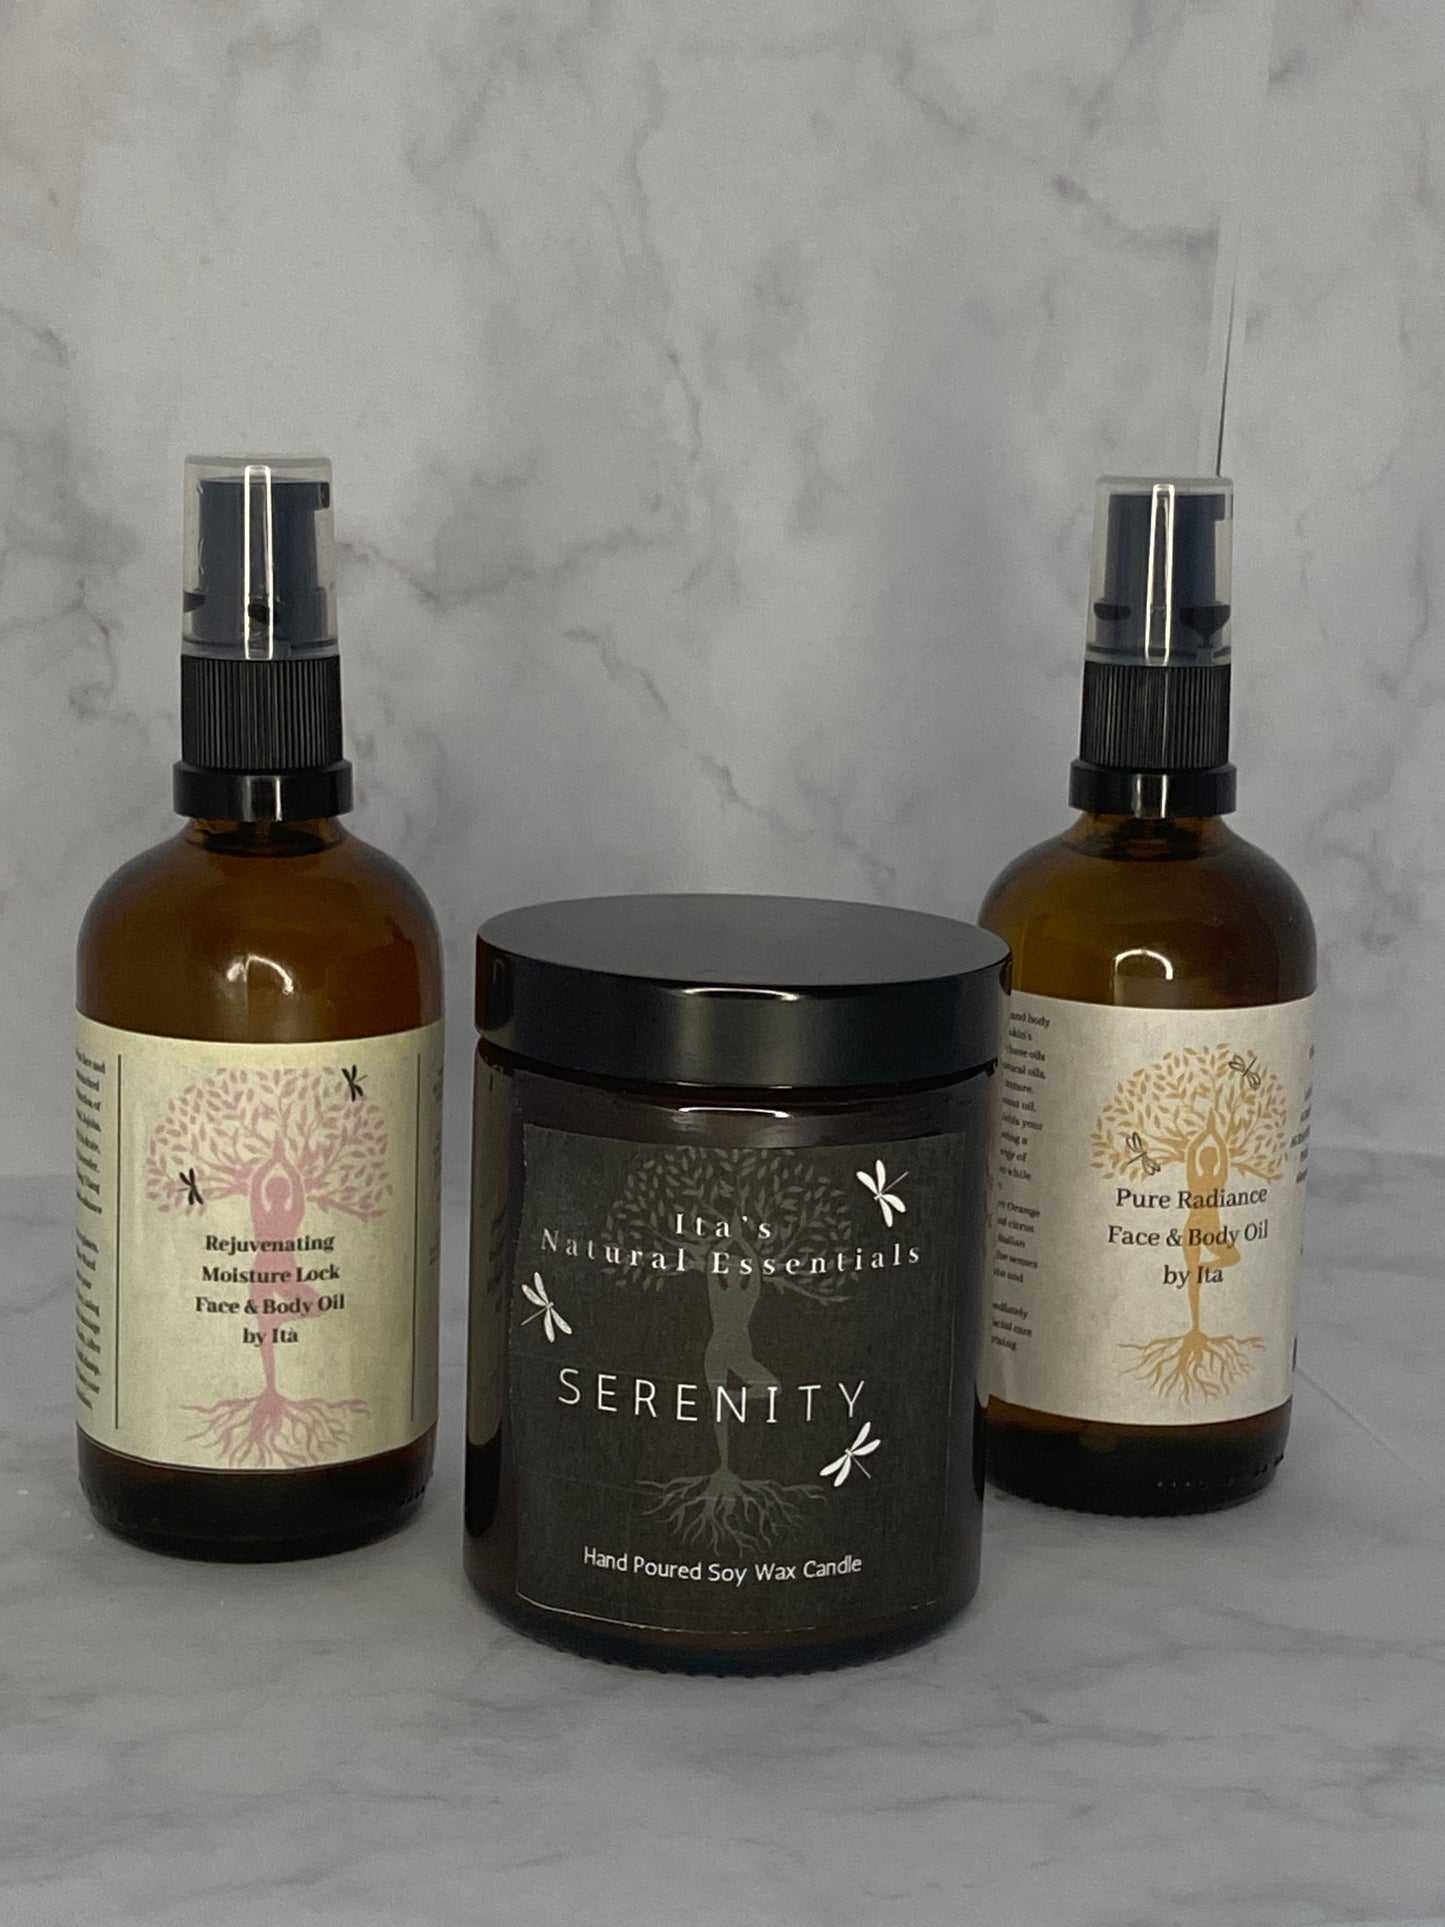 Serenity Aromatherapy Candle l Essential Oils l Vegan I 100% Soy Wax l Selfcare I Ita's Natural Essentials.